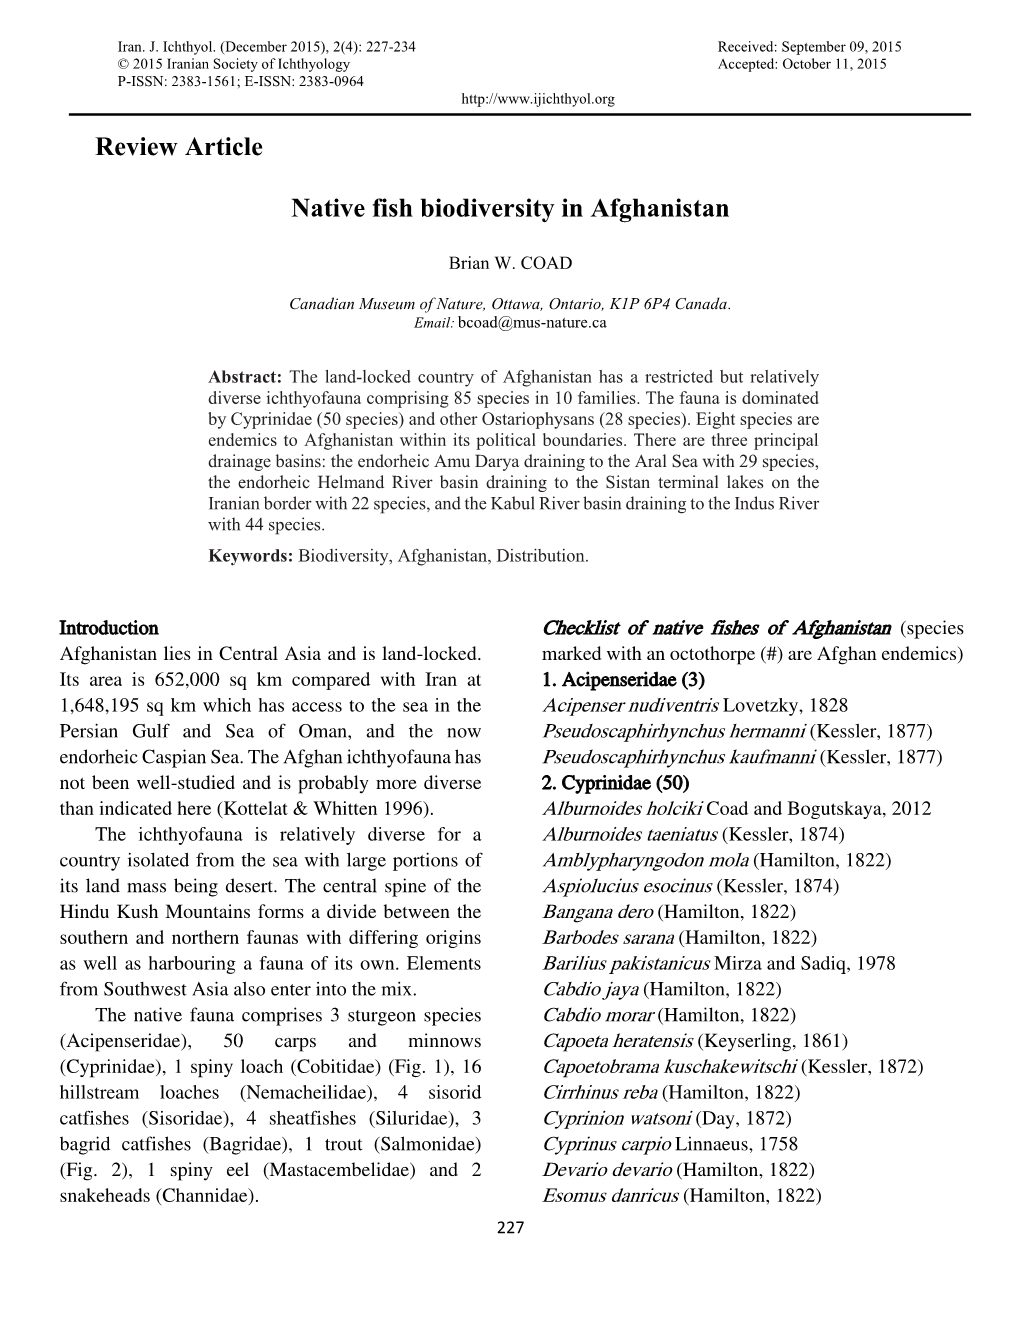 Review Article Native Fish Biodiversity in Afghanistan